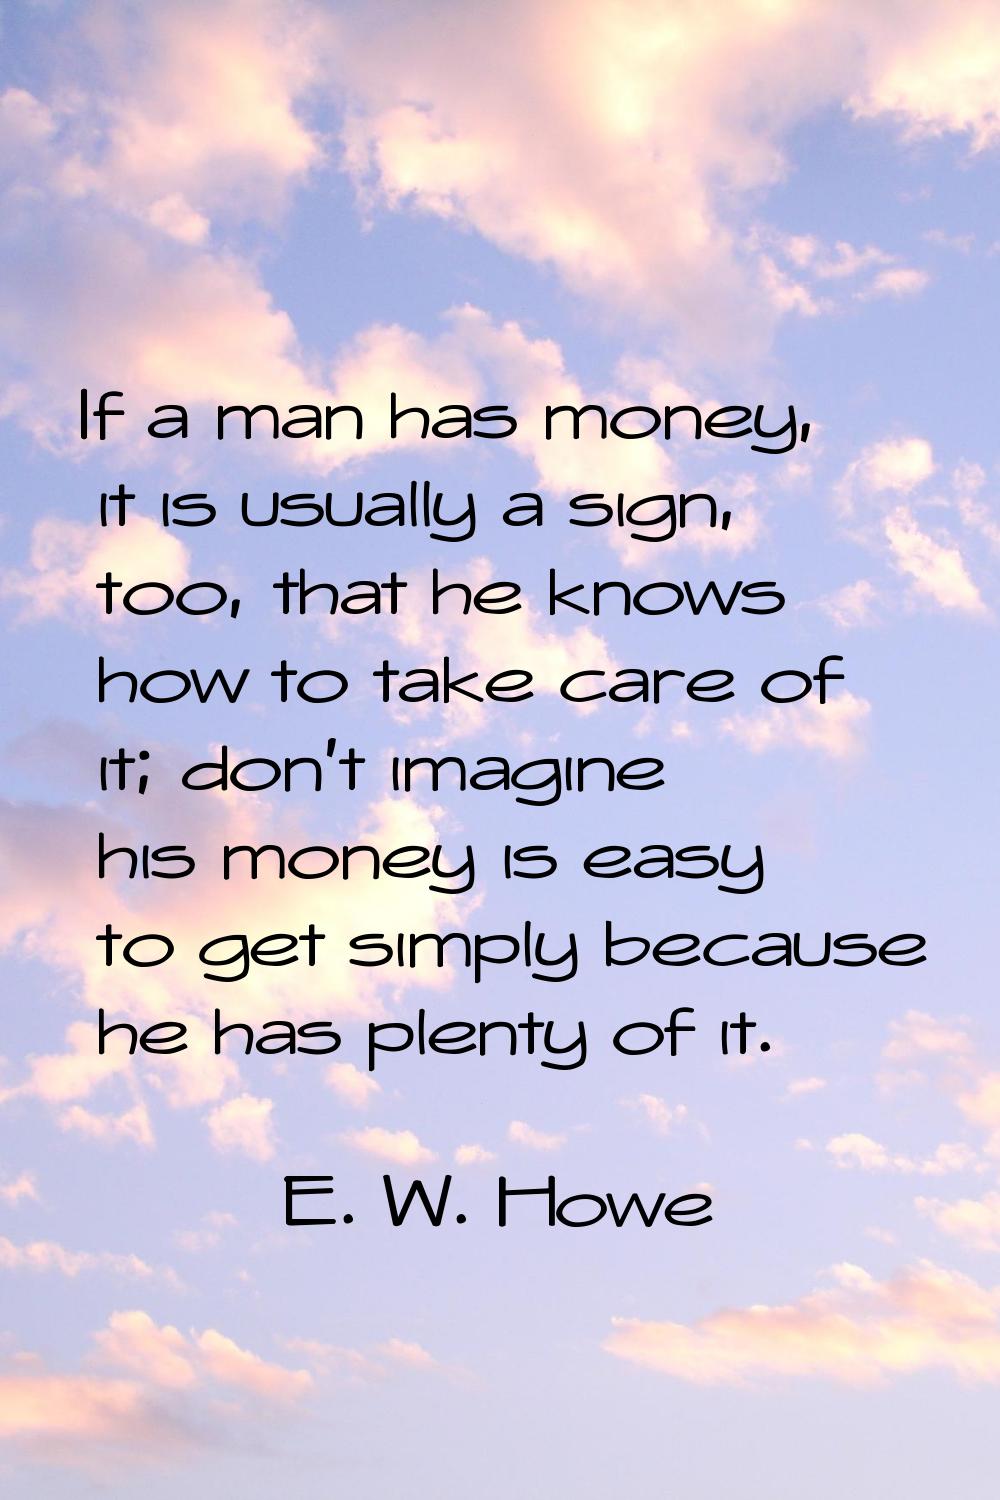 If a man has money, it is usually a sign, too, that he knows how to take care of it; don't imagine 